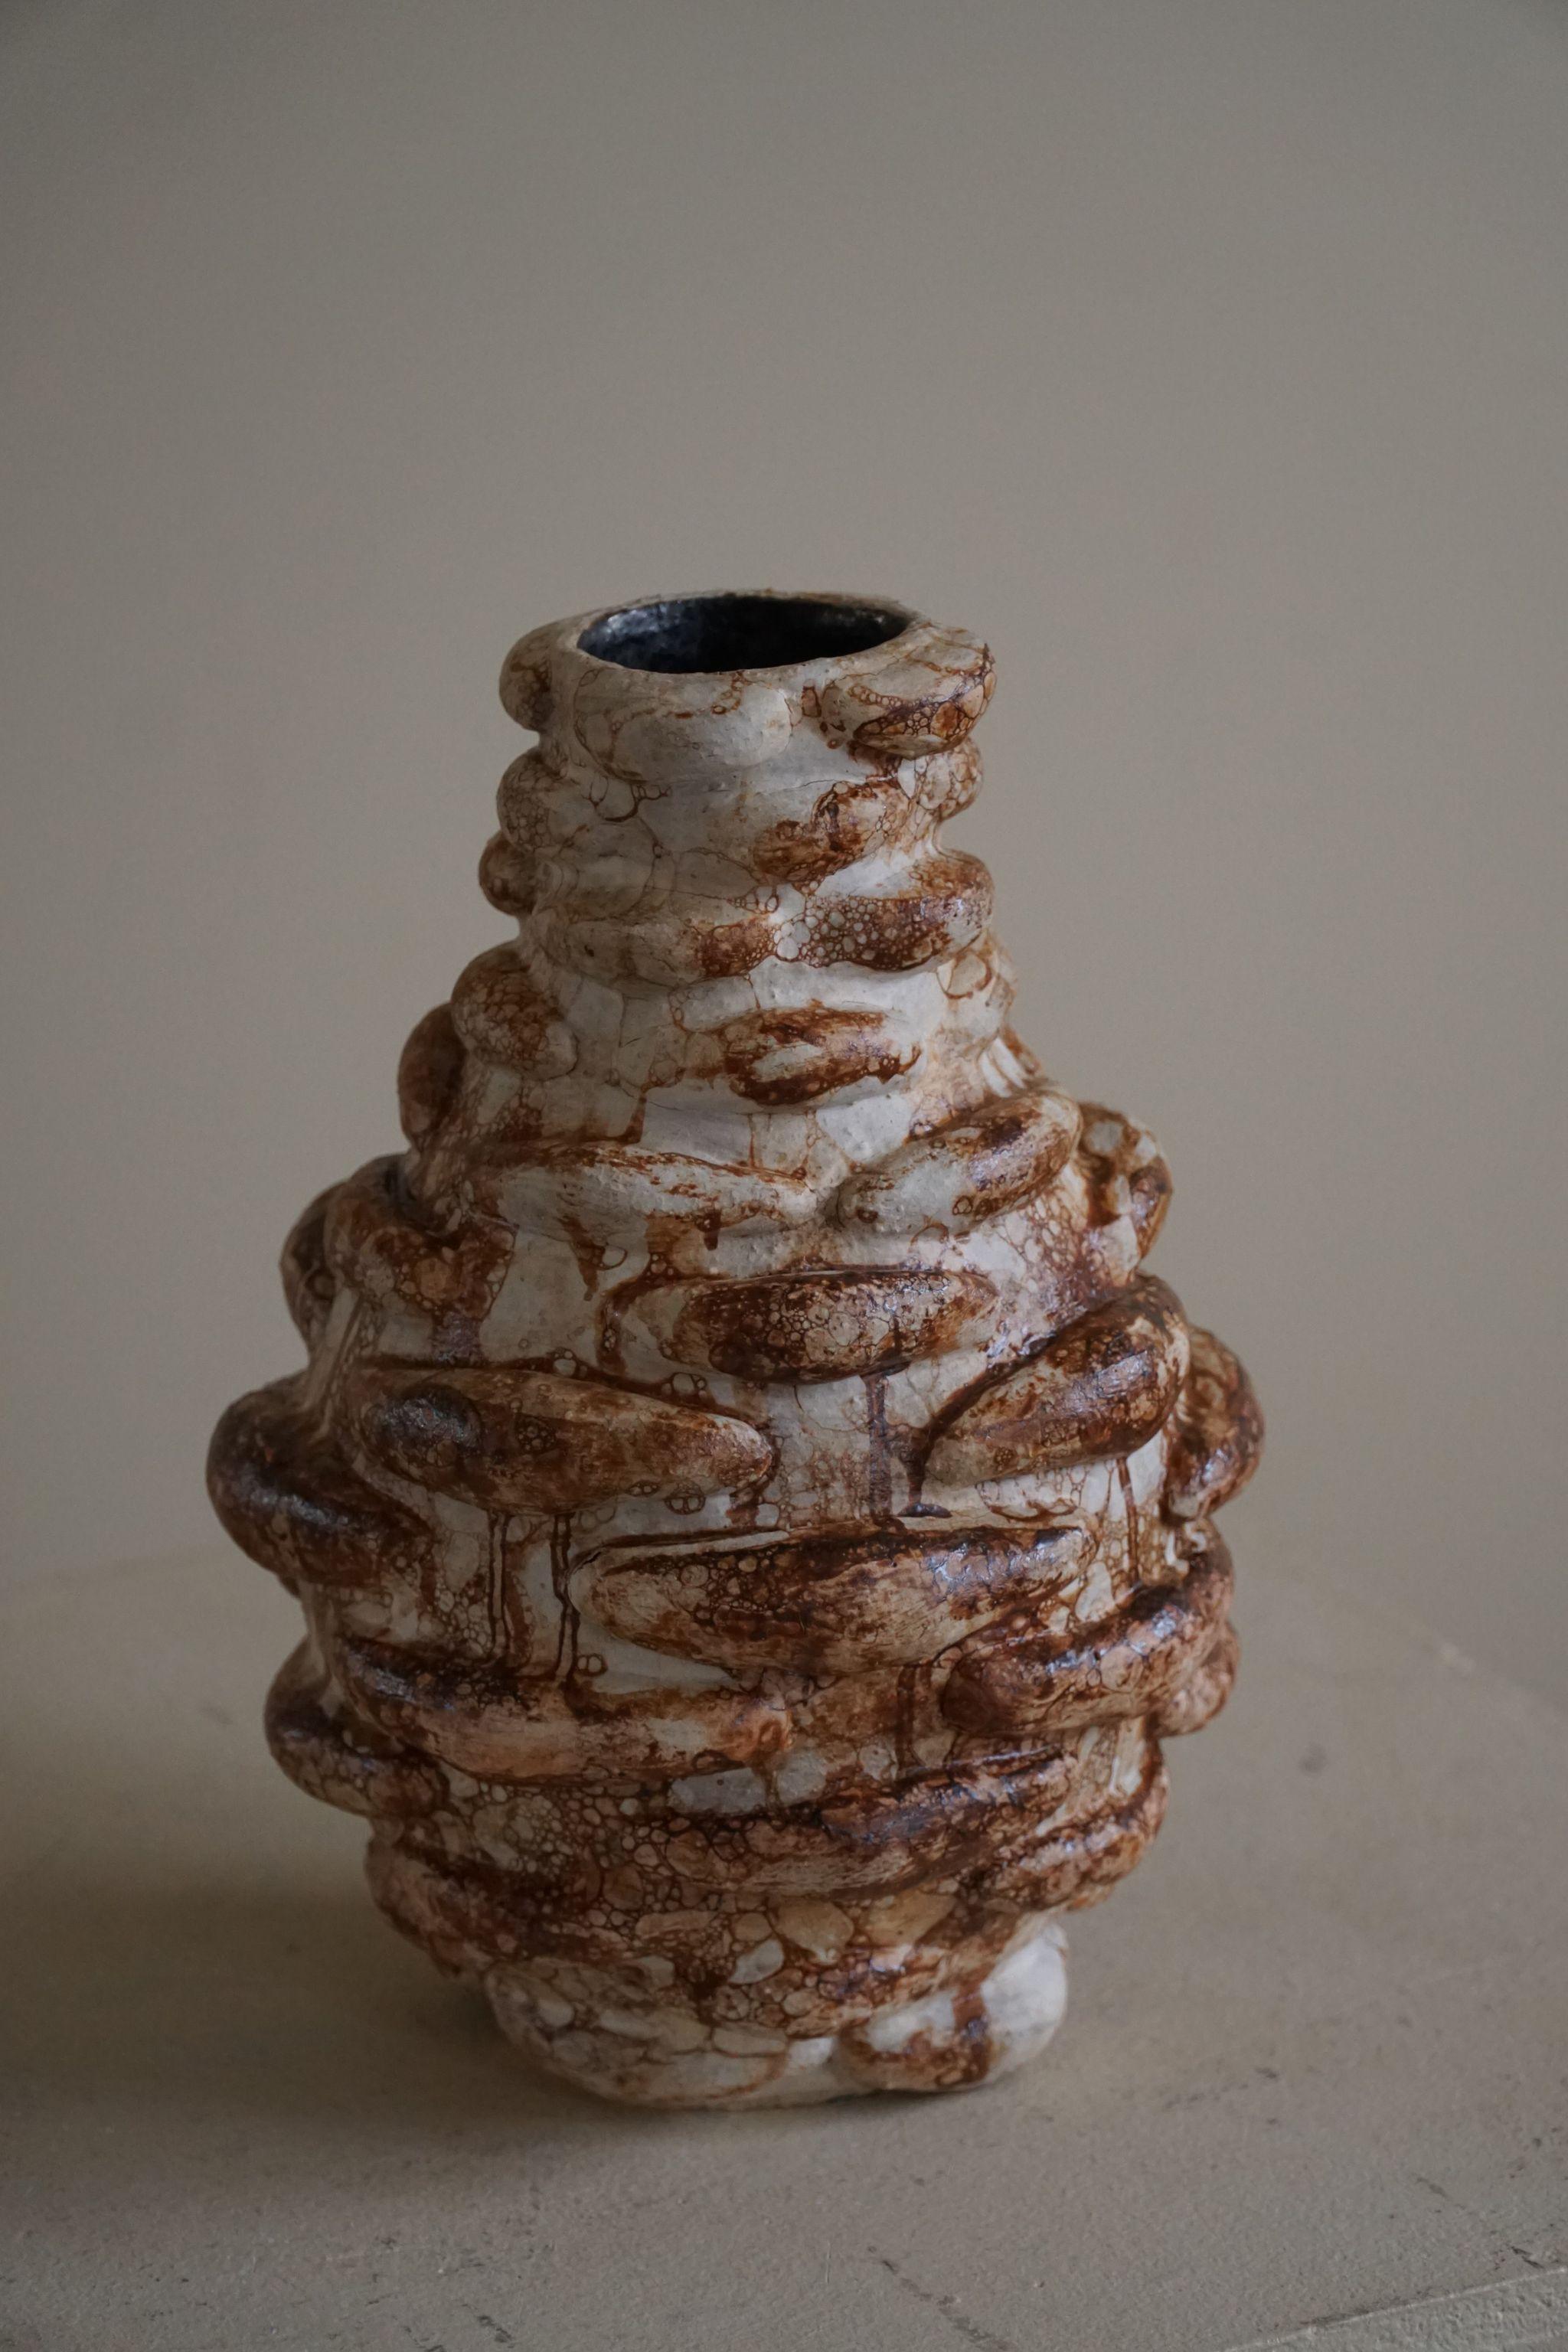 Hand-Crafted Ceramic, Stoneware Vase in Earthen Colored Glaze by Danish Artist Ole Victor